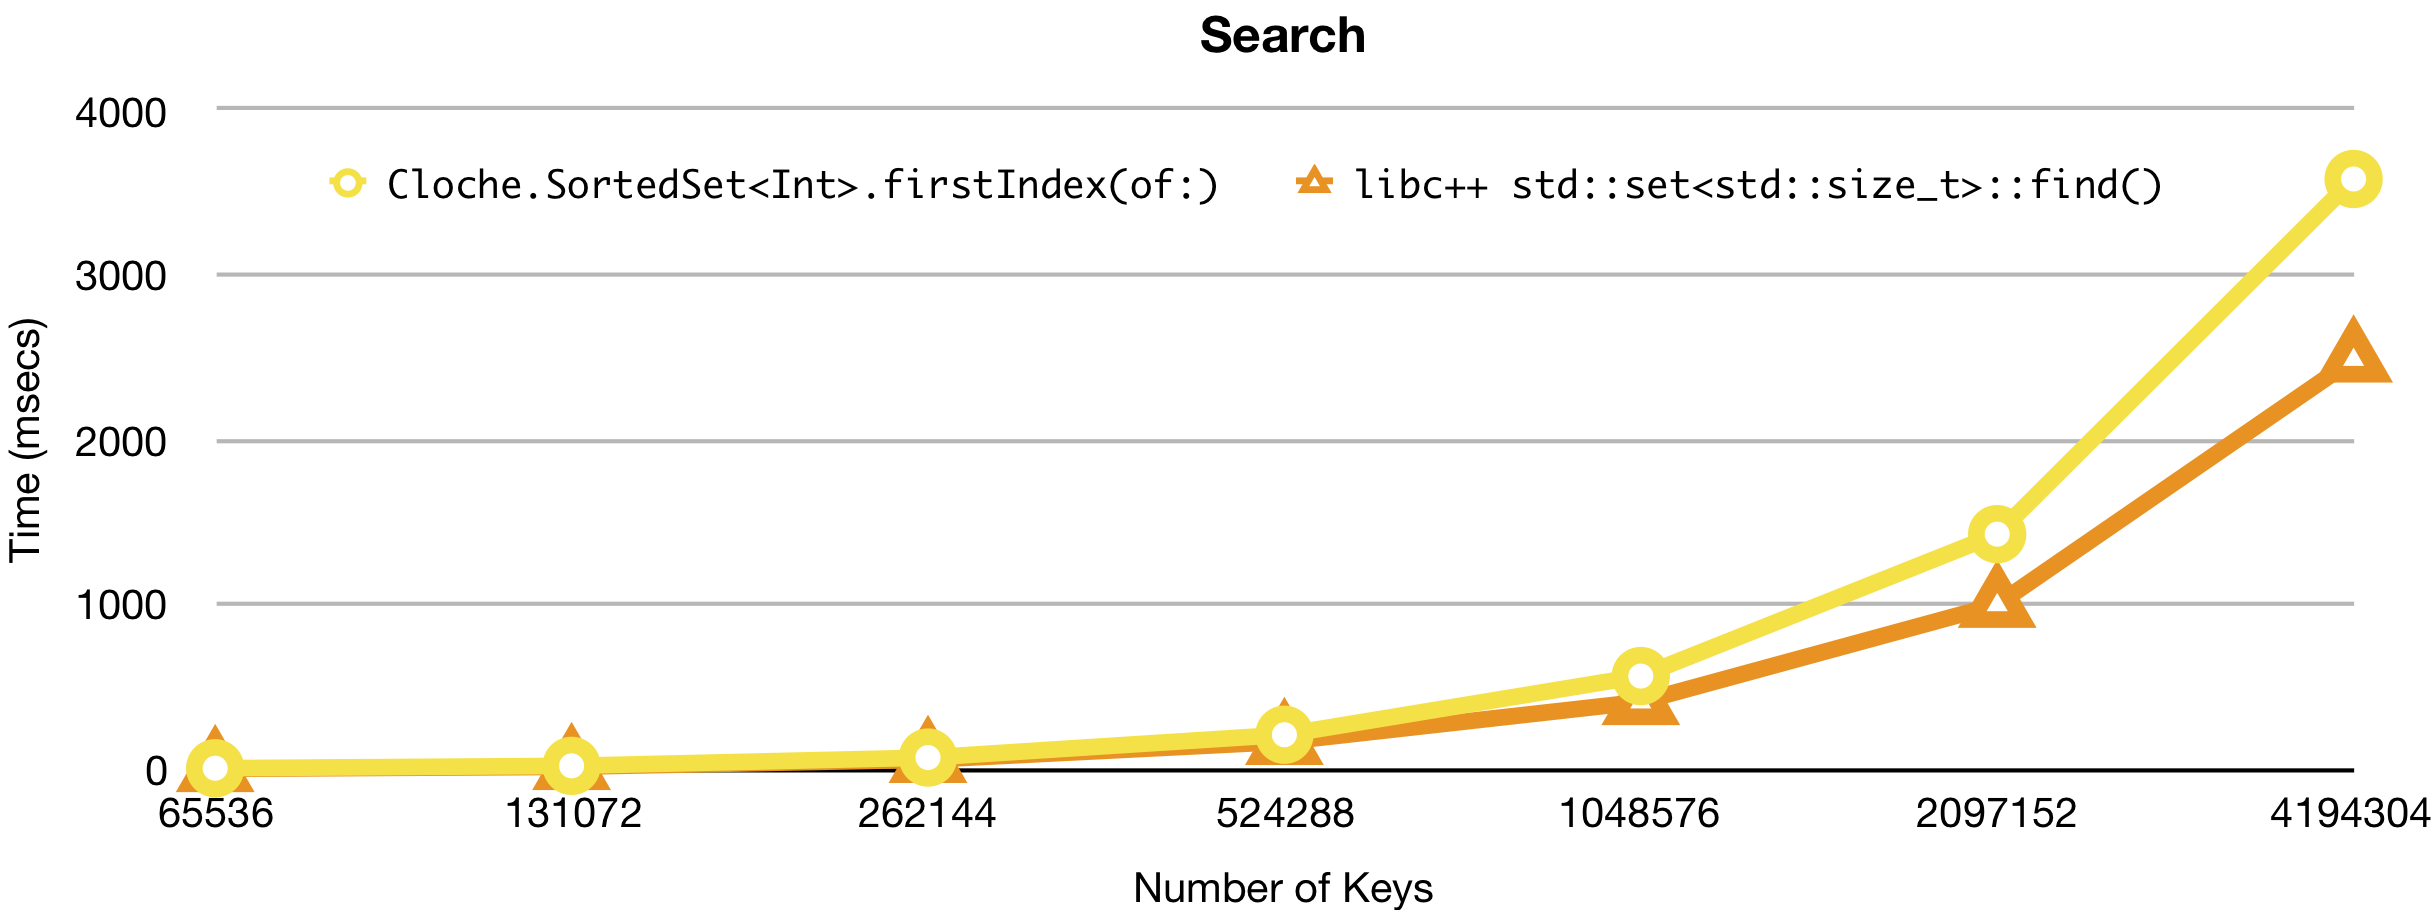 Search Performance Comparison under macOS